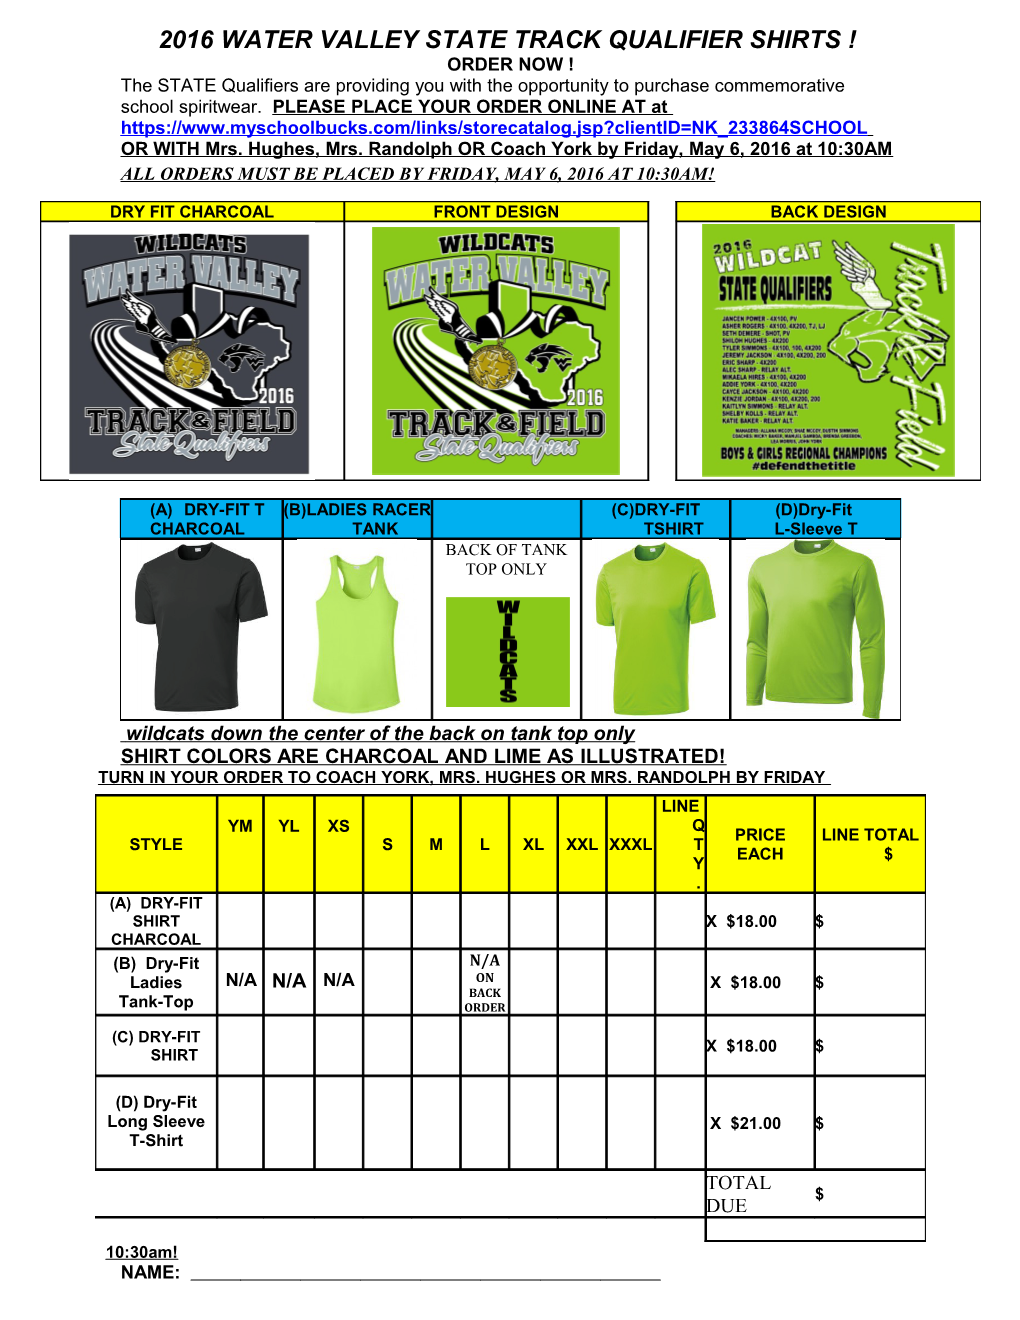 2016 Water Valley State Track Qualifier Shirts !